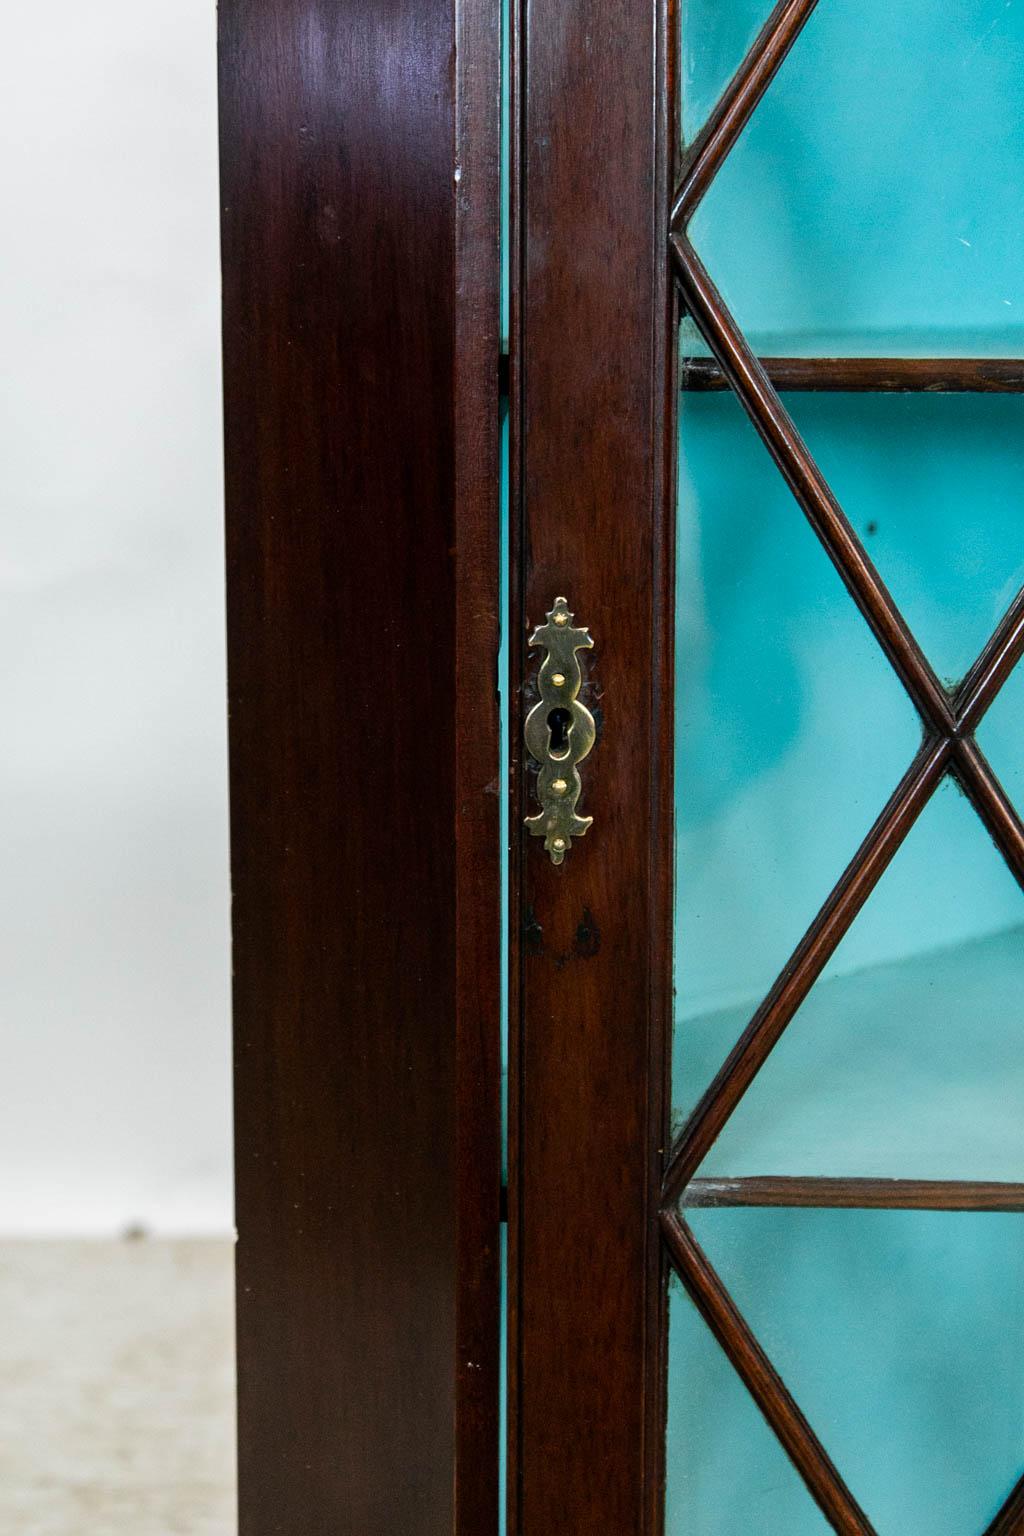 The door of this mahogany corner cupboard has blown wavy glass diamond shaped panes. It has three fixed shelves with a shallow butterfly shape. The interior is painted with a robin's egg blue color except for the front edges of the shelves which